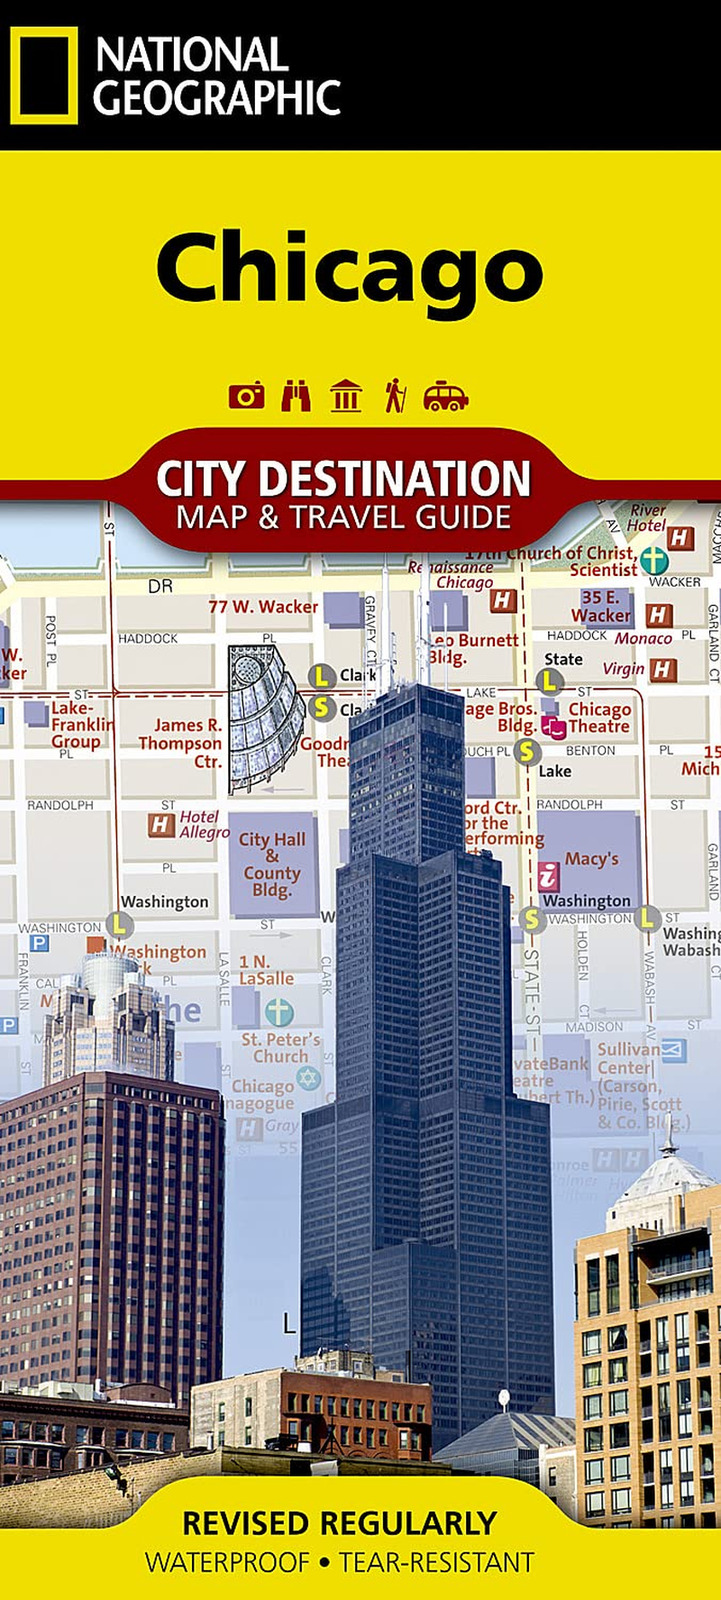 Chicago Map (National Geographic Destination City Map) - NEW